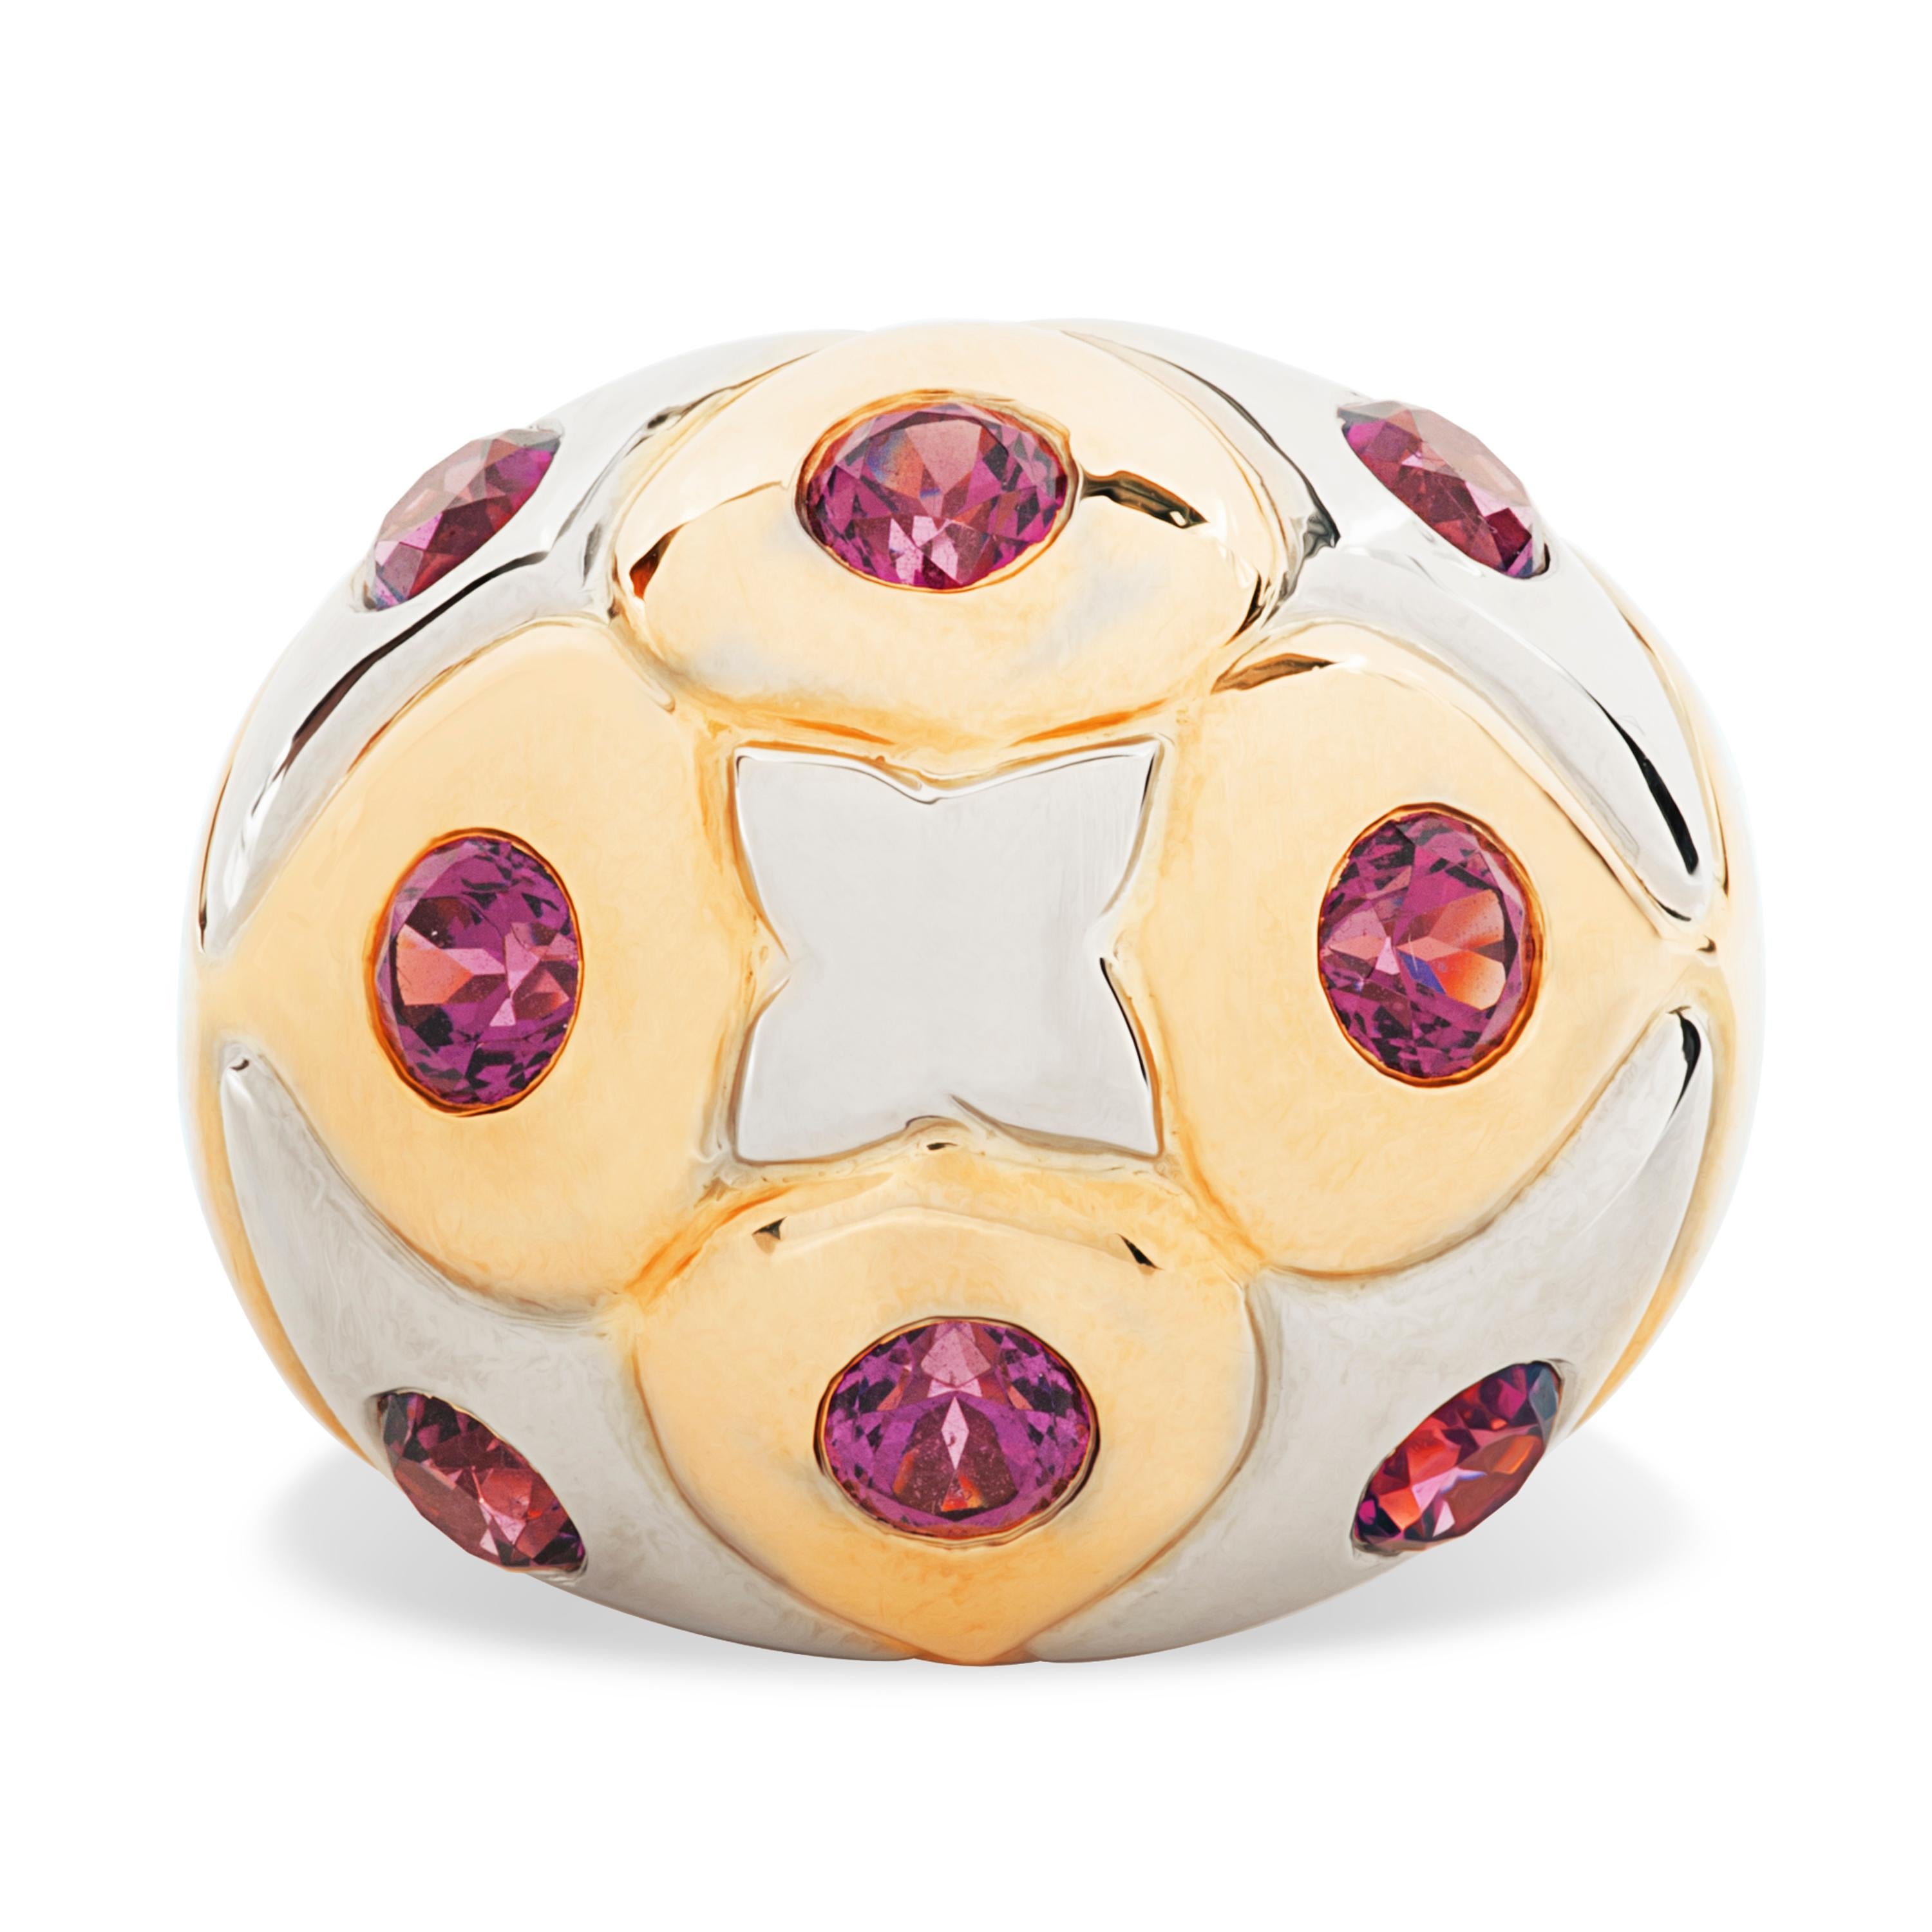 This vintage Bvlgari ring features 8 round garnets totaling approximately 2.60 carats set in a raised two toned 18k yellow and white gold dome.

The dome measures 20mm wide and tapers down to 3.3mm at the bottom of the shank.  The top of the dome